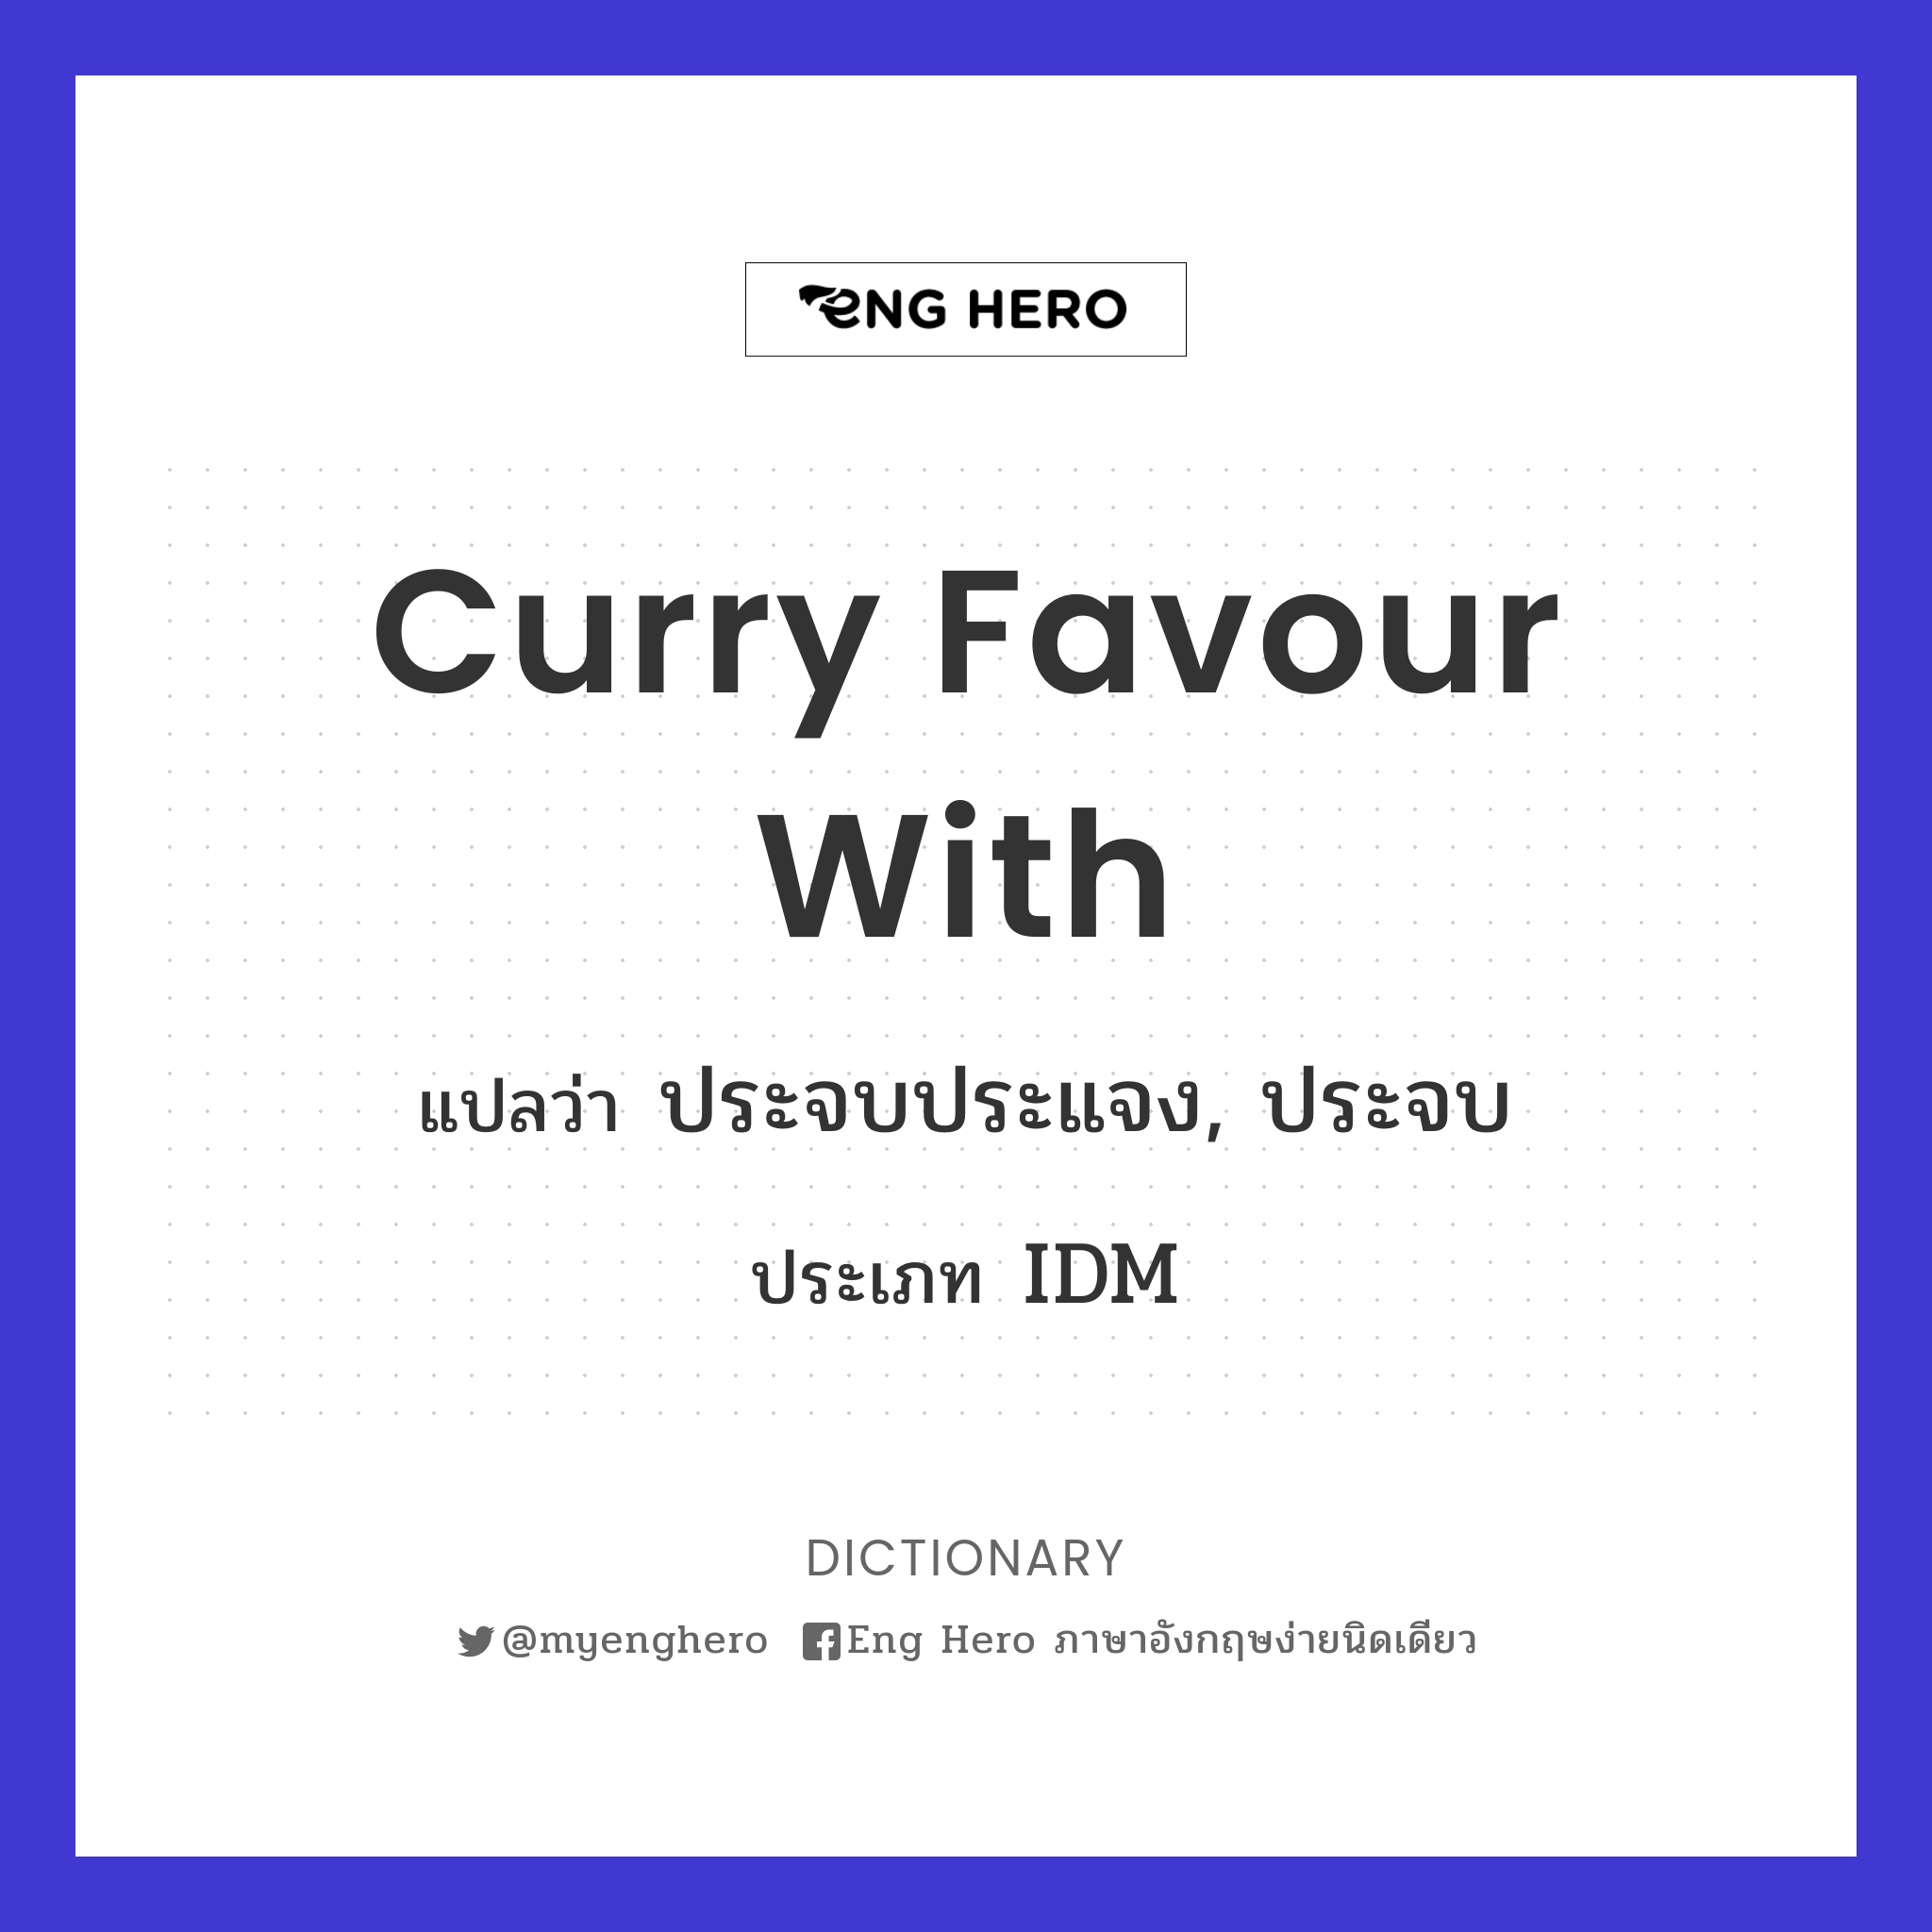 curry favour with